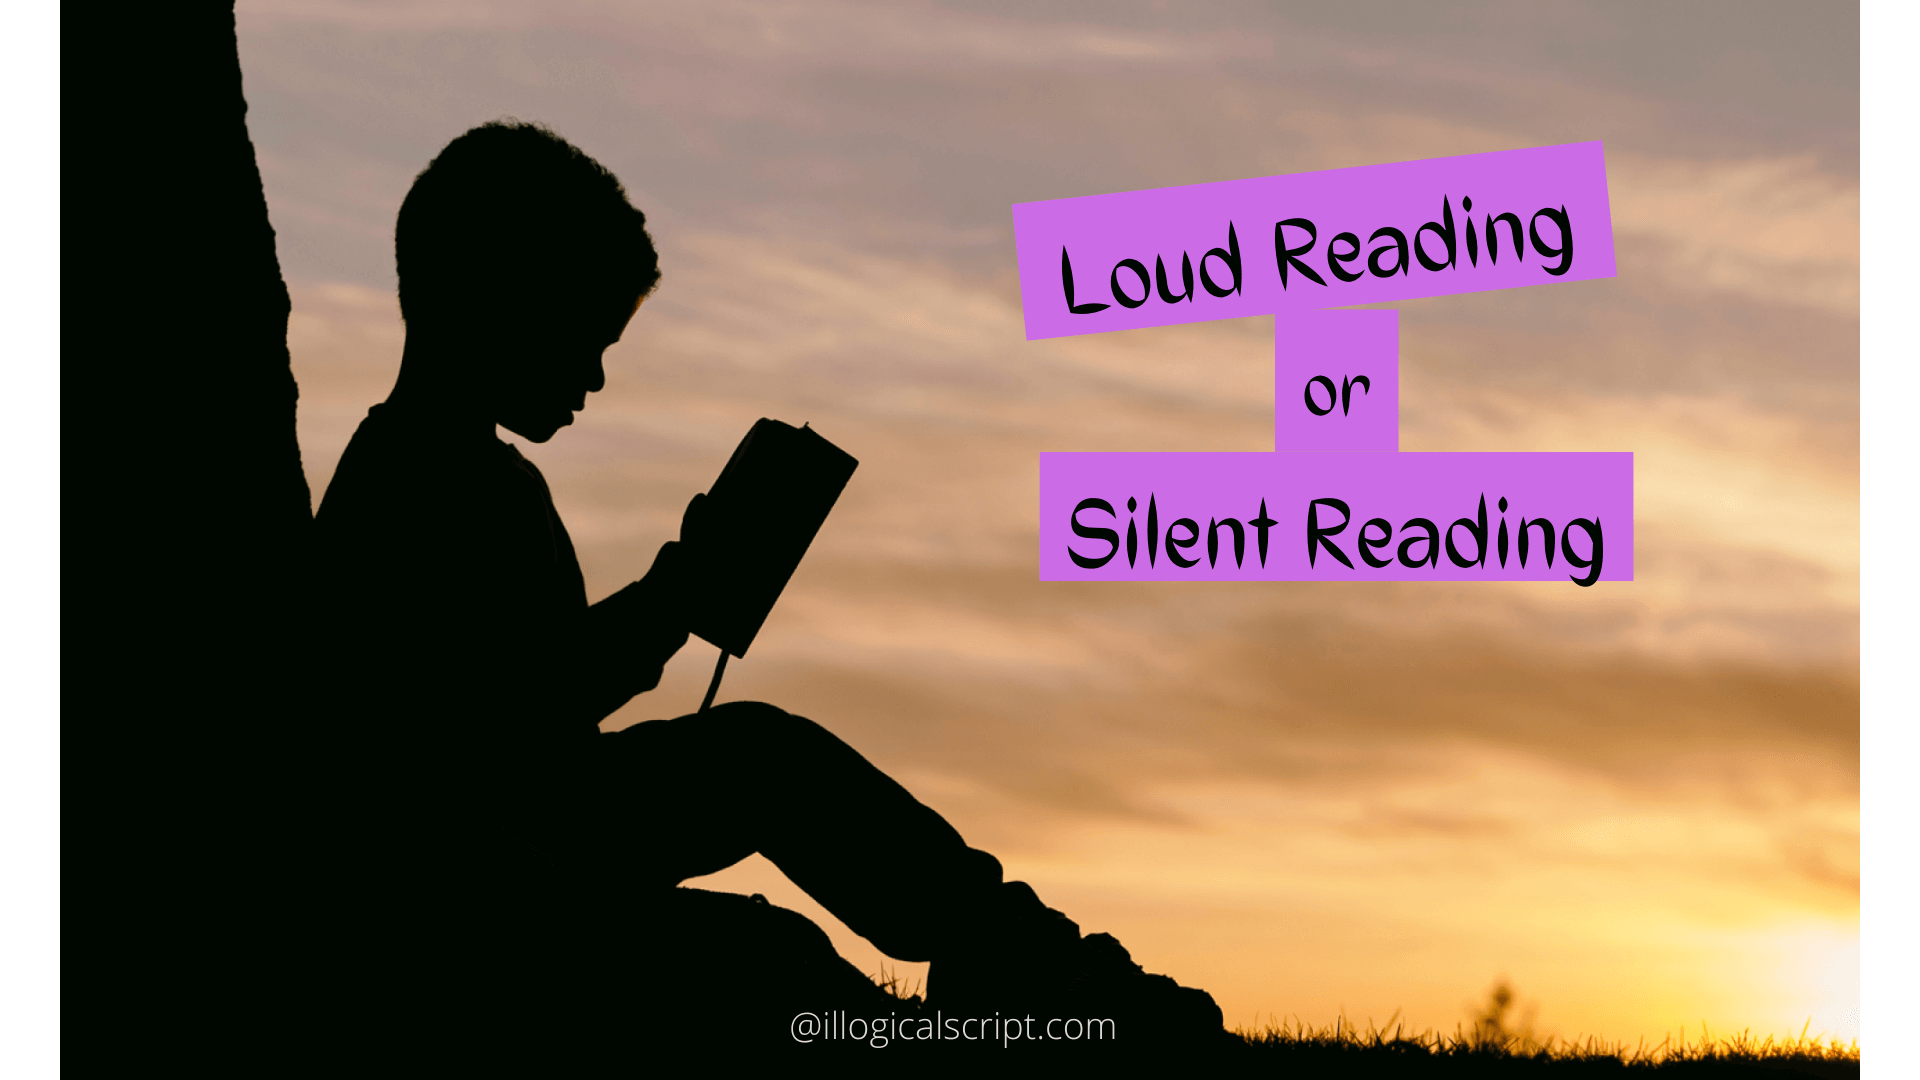 Loud Reading and Silent Reading | What should you prefer?